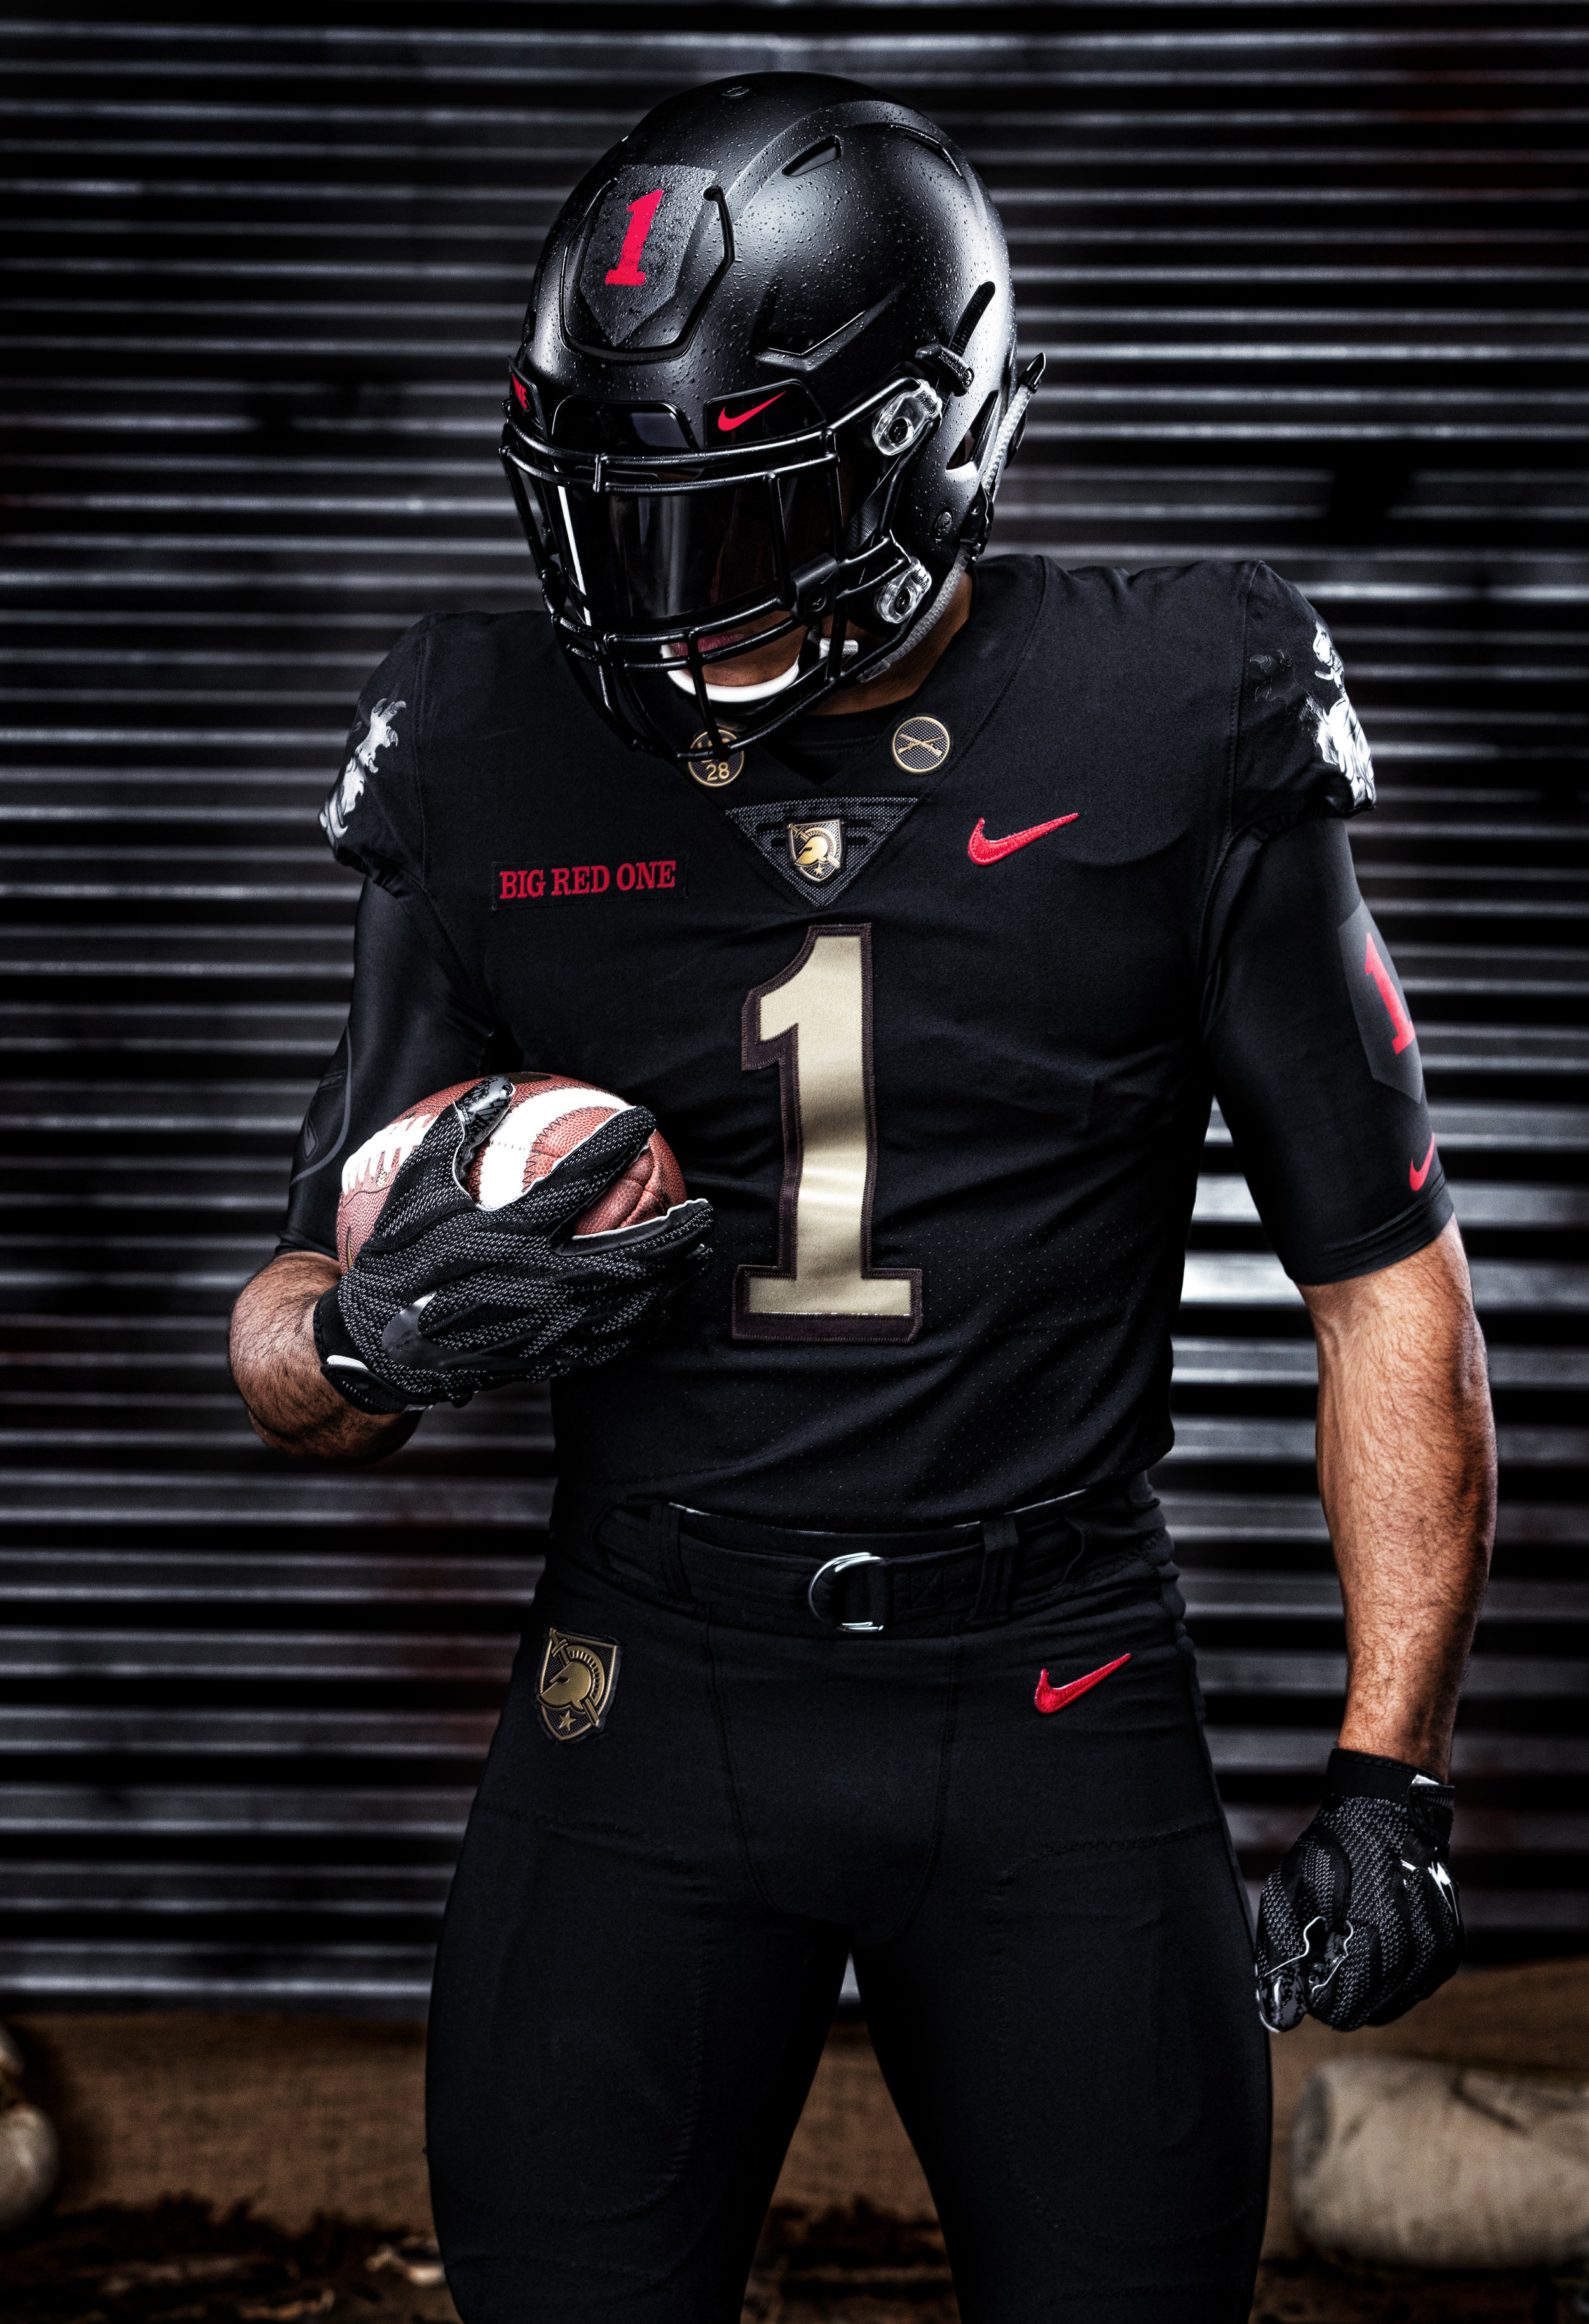 Army's Army-Navy Game Uniform Is a Tribute to a Famed World War I Unit